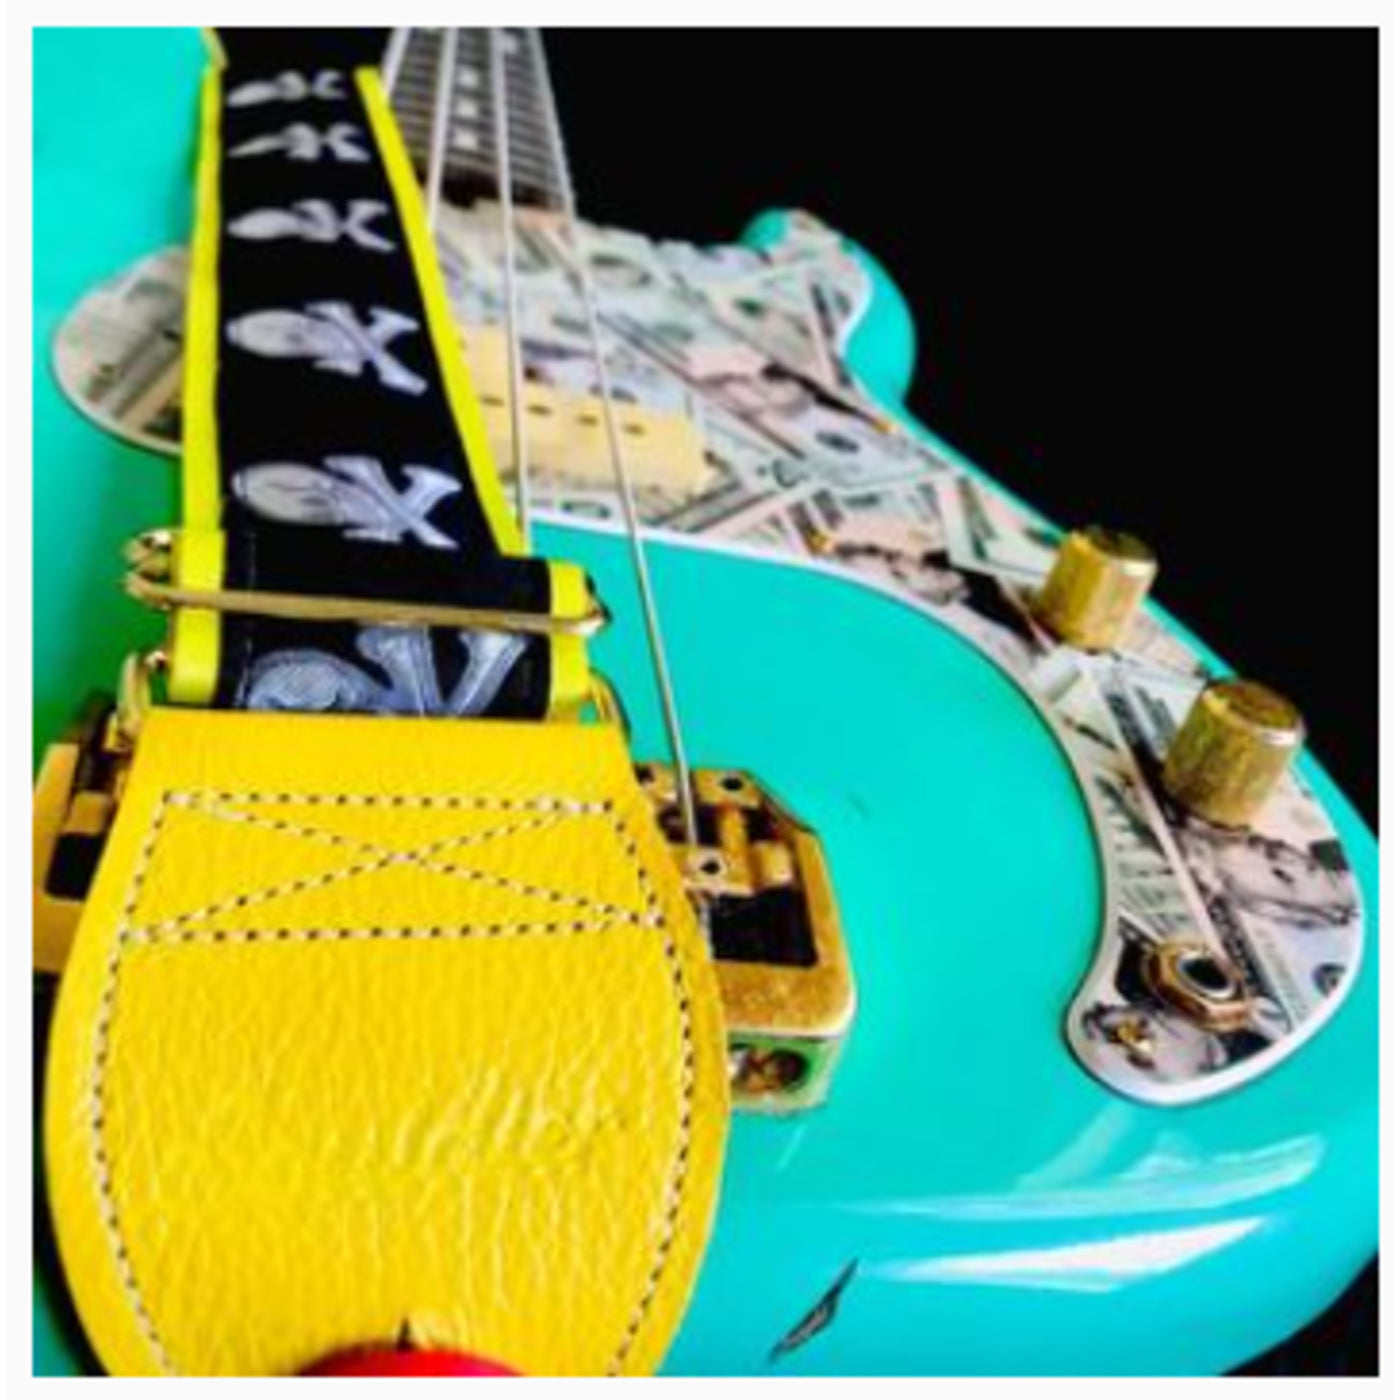 Souldier TGS1318BK01BK - Handmade Souldier Fabric Torpedo Strap for Bass, Electric, or Acoustic Guitar, Adjustable Length from 42.5" to 55" Made in the USA, Gold